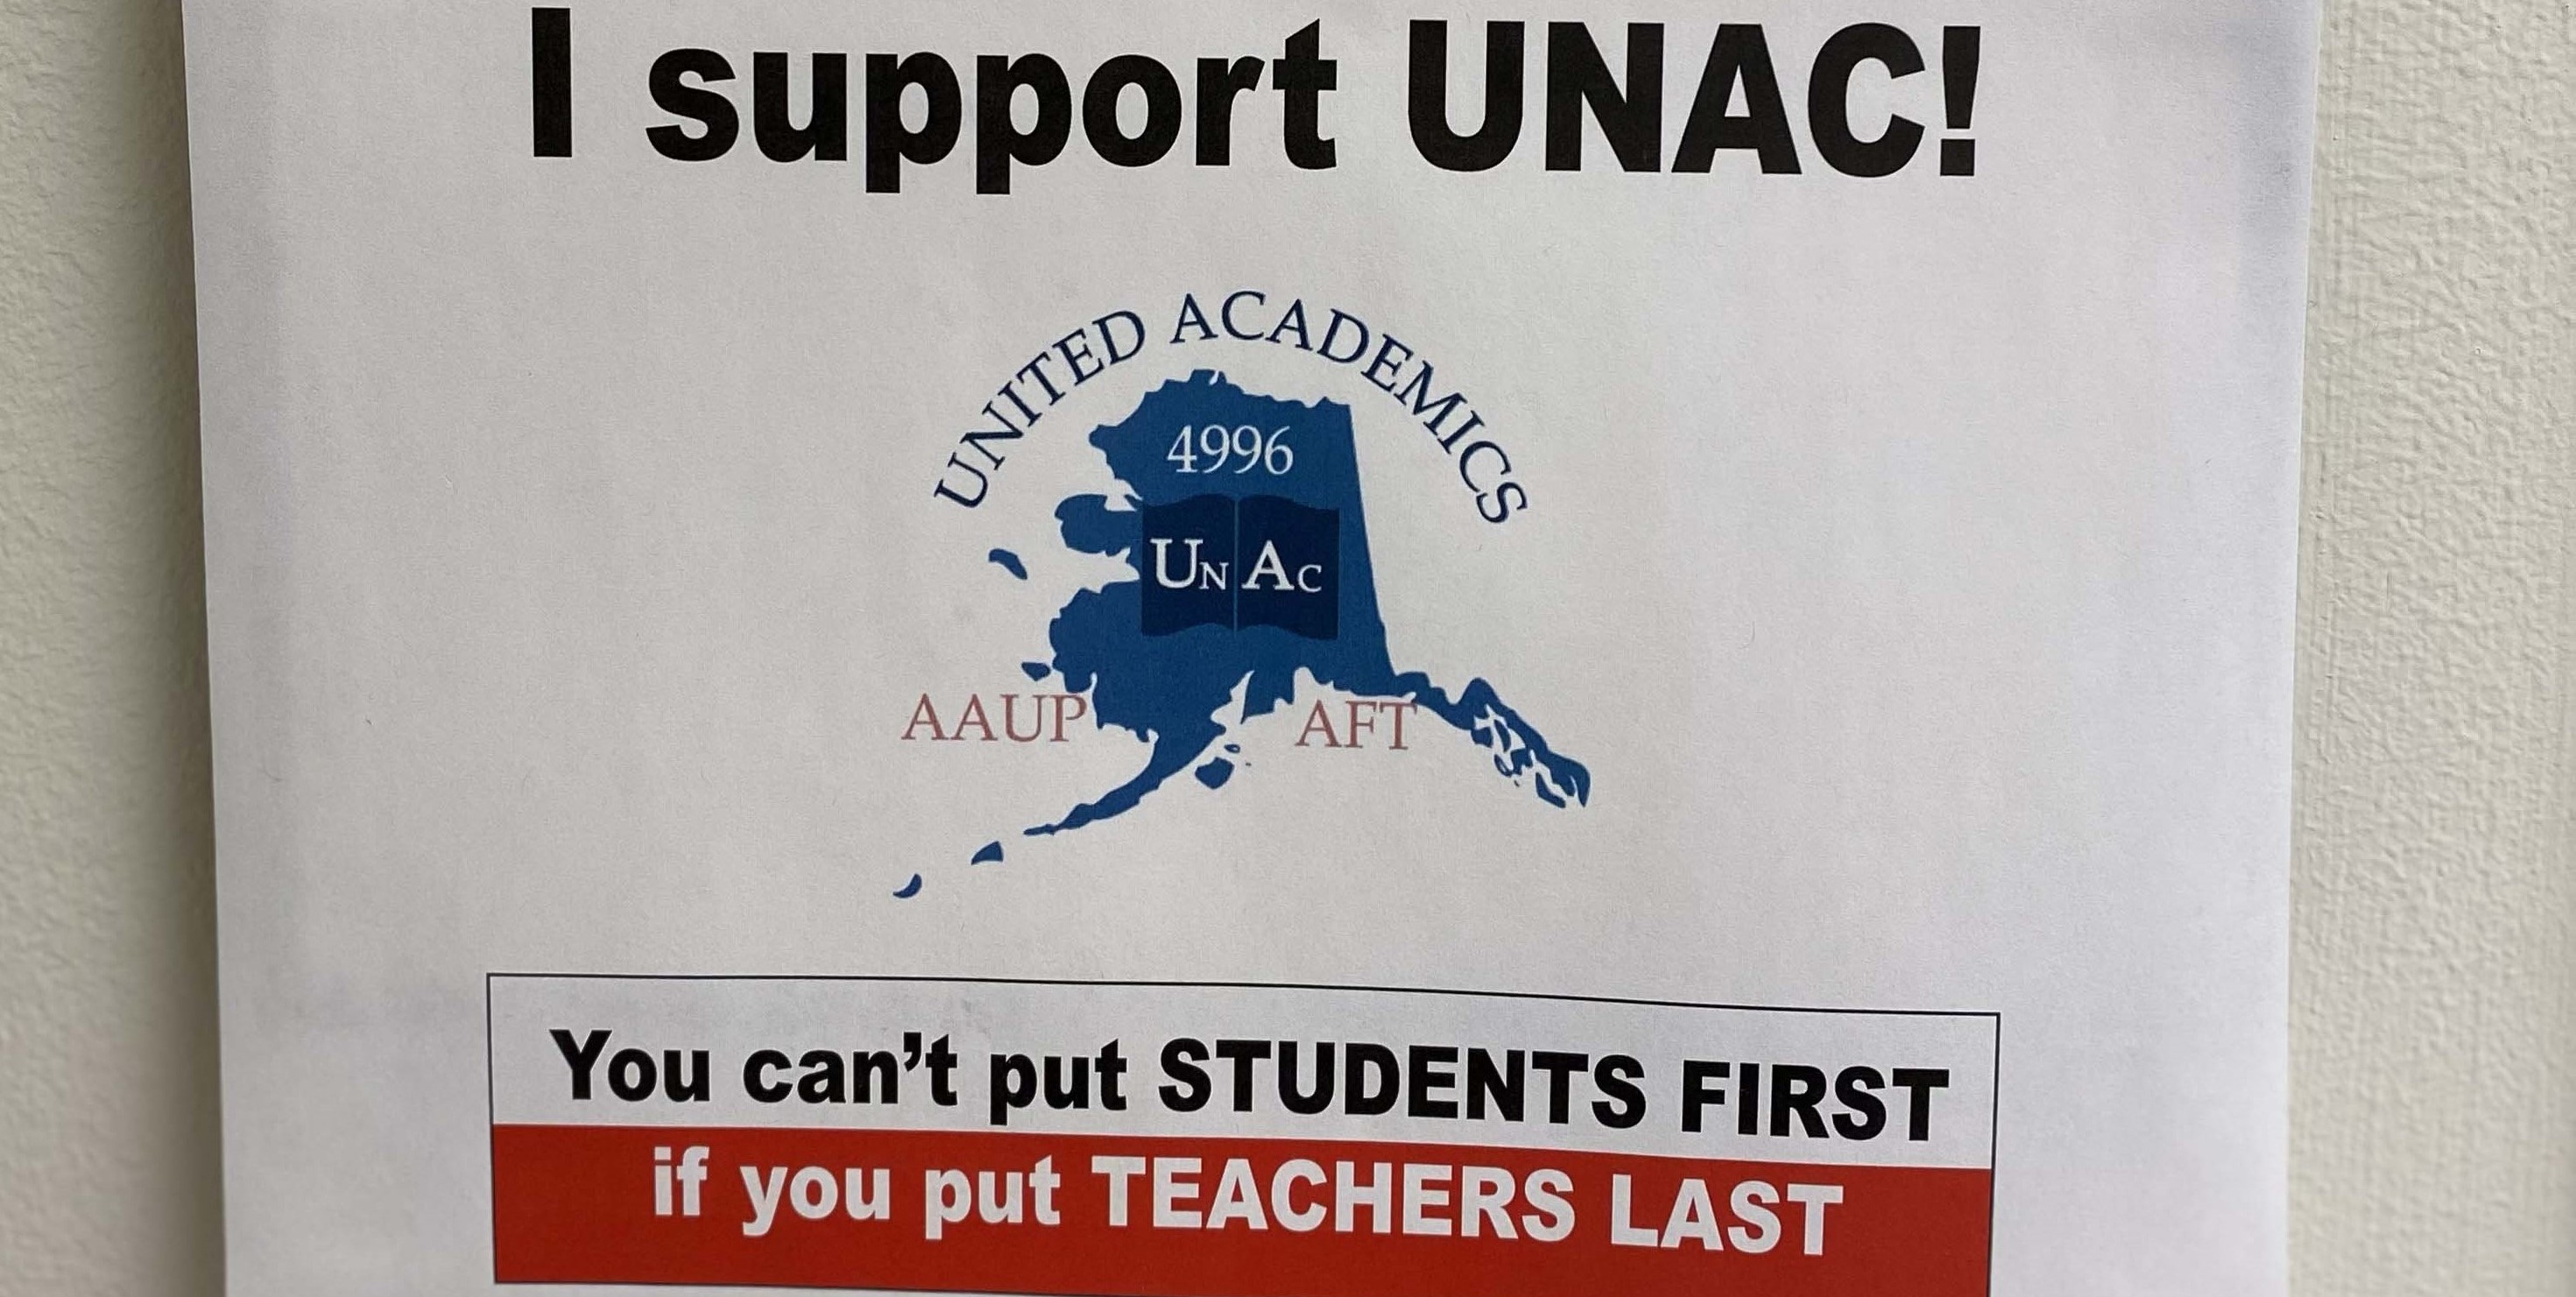 office door sign that says "I support UNAC! You can't put students first if you put teachers last"